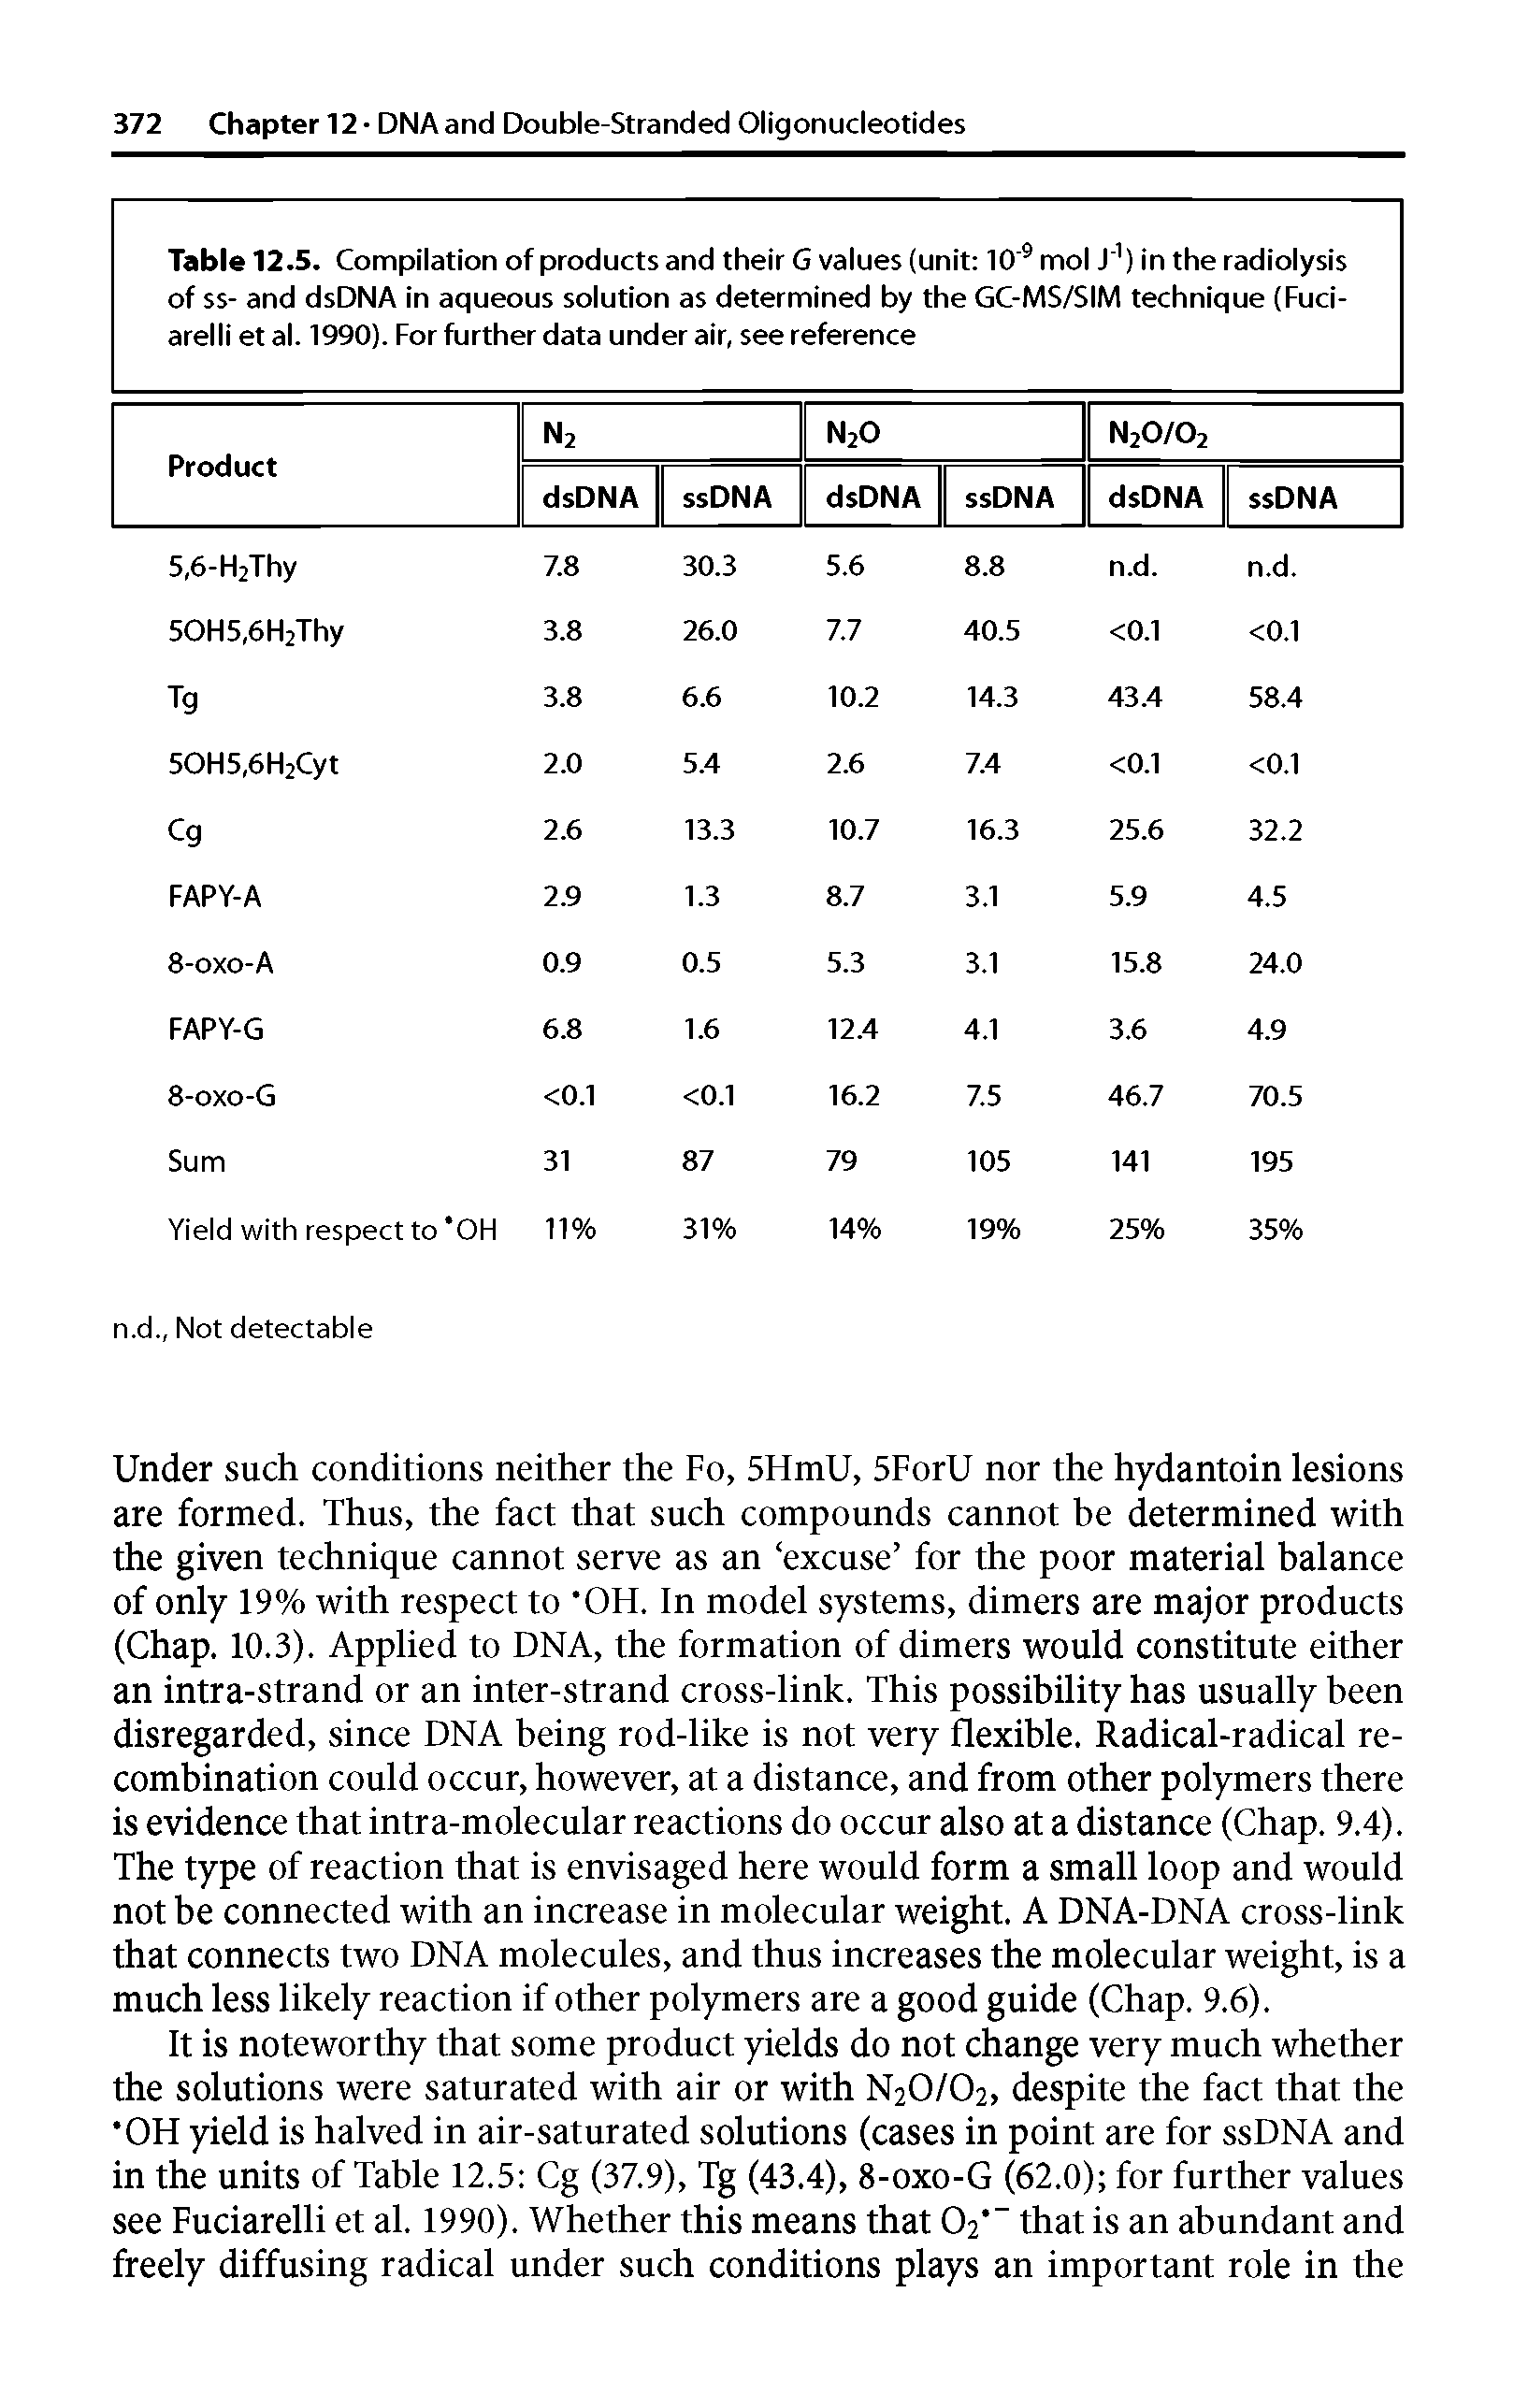 Table 12.5. Compilation of products and their G values (unit 10 9 mol J"1) in the radiolysis of ss- and dsDNA in aqueous solution as determined by the GC-MS/SIM technique (Fuci-...